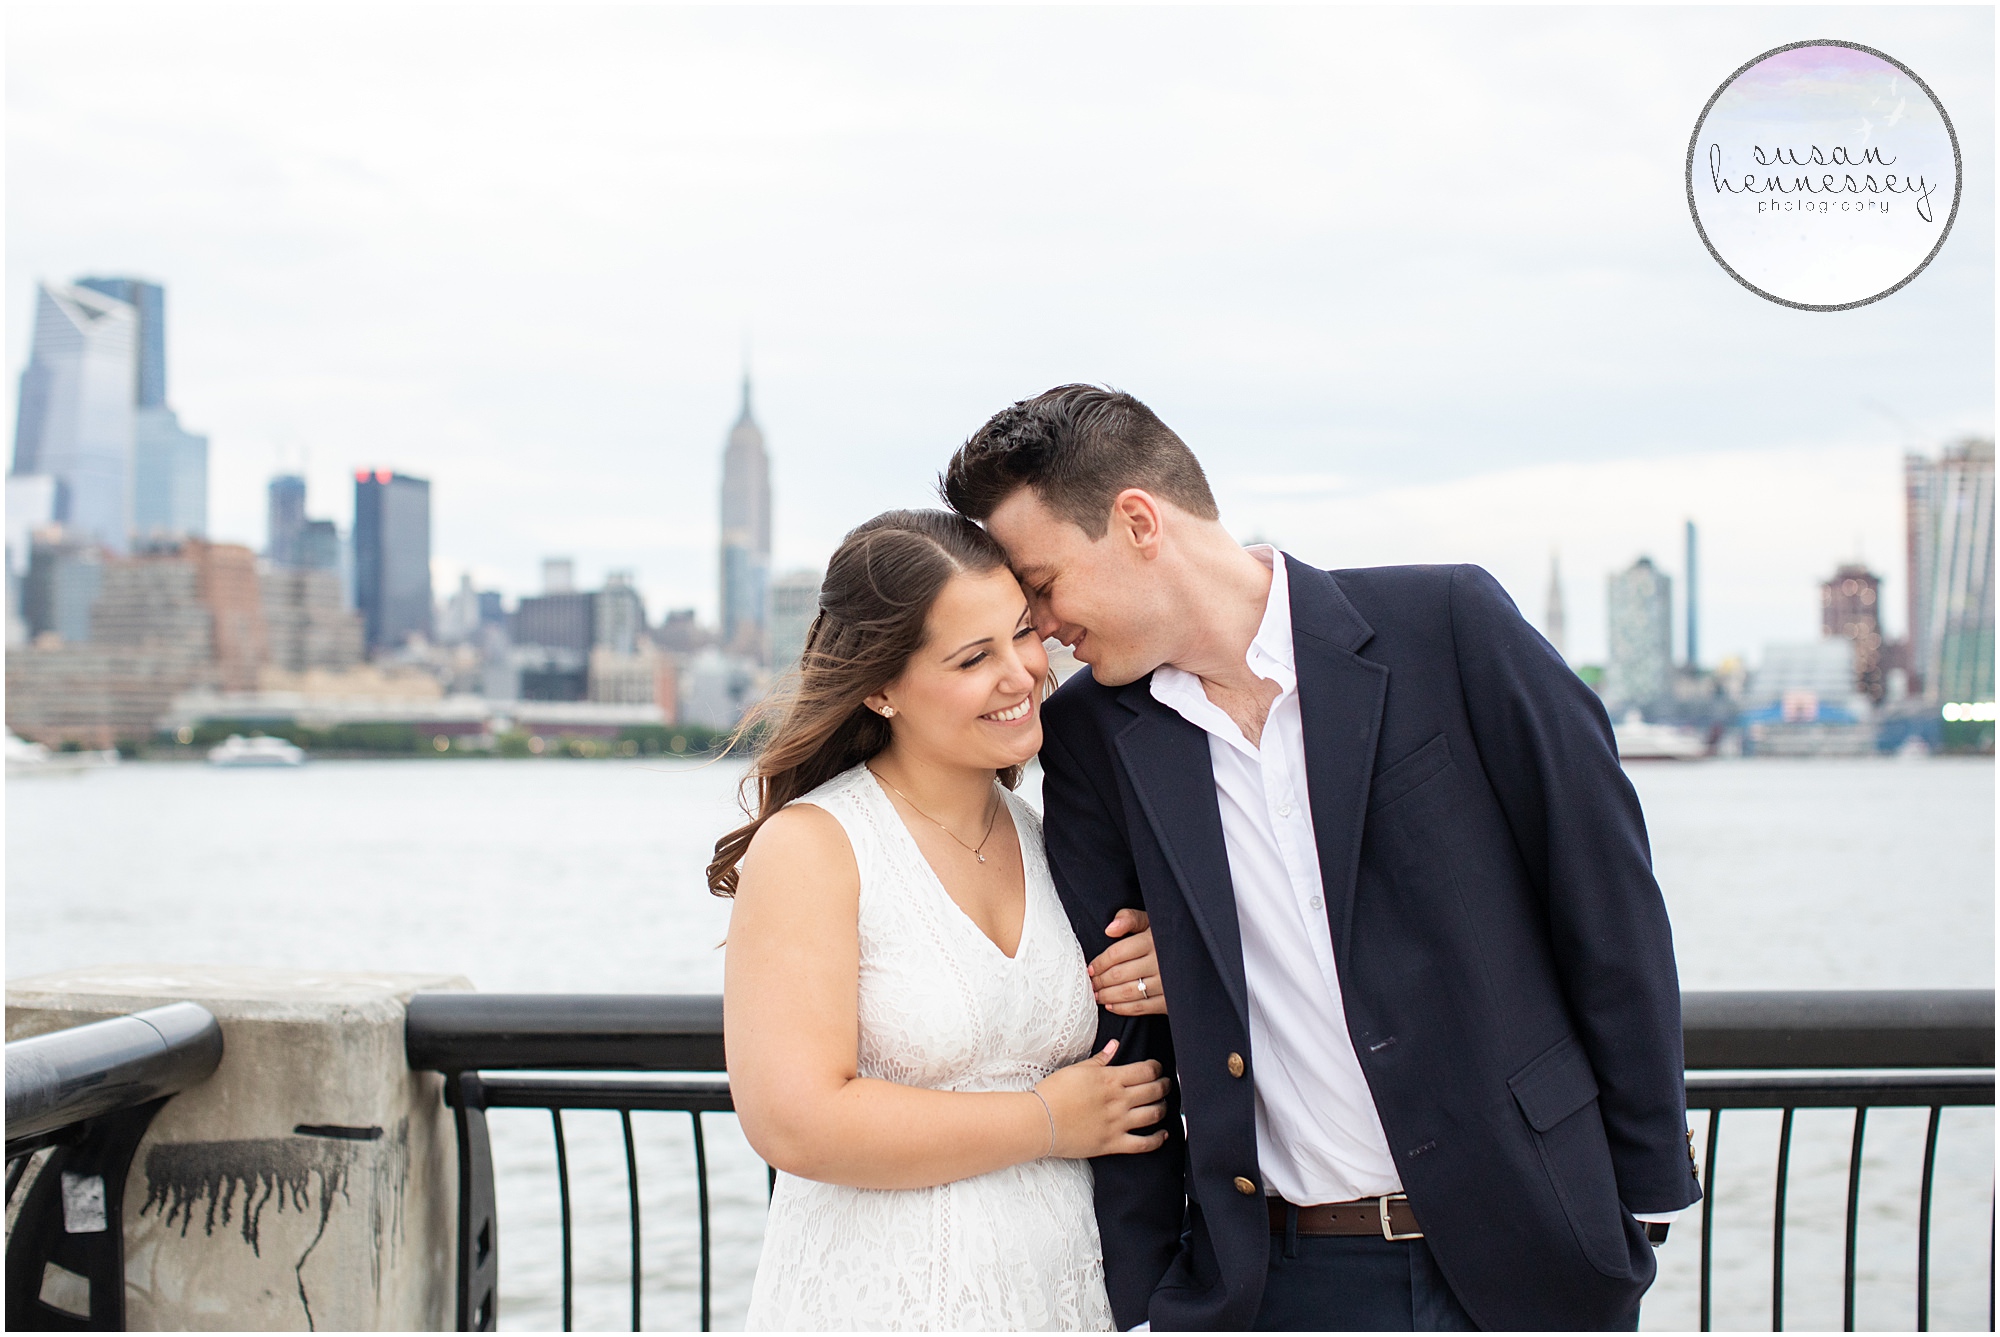 An engaged couple with the empire state building in the background.